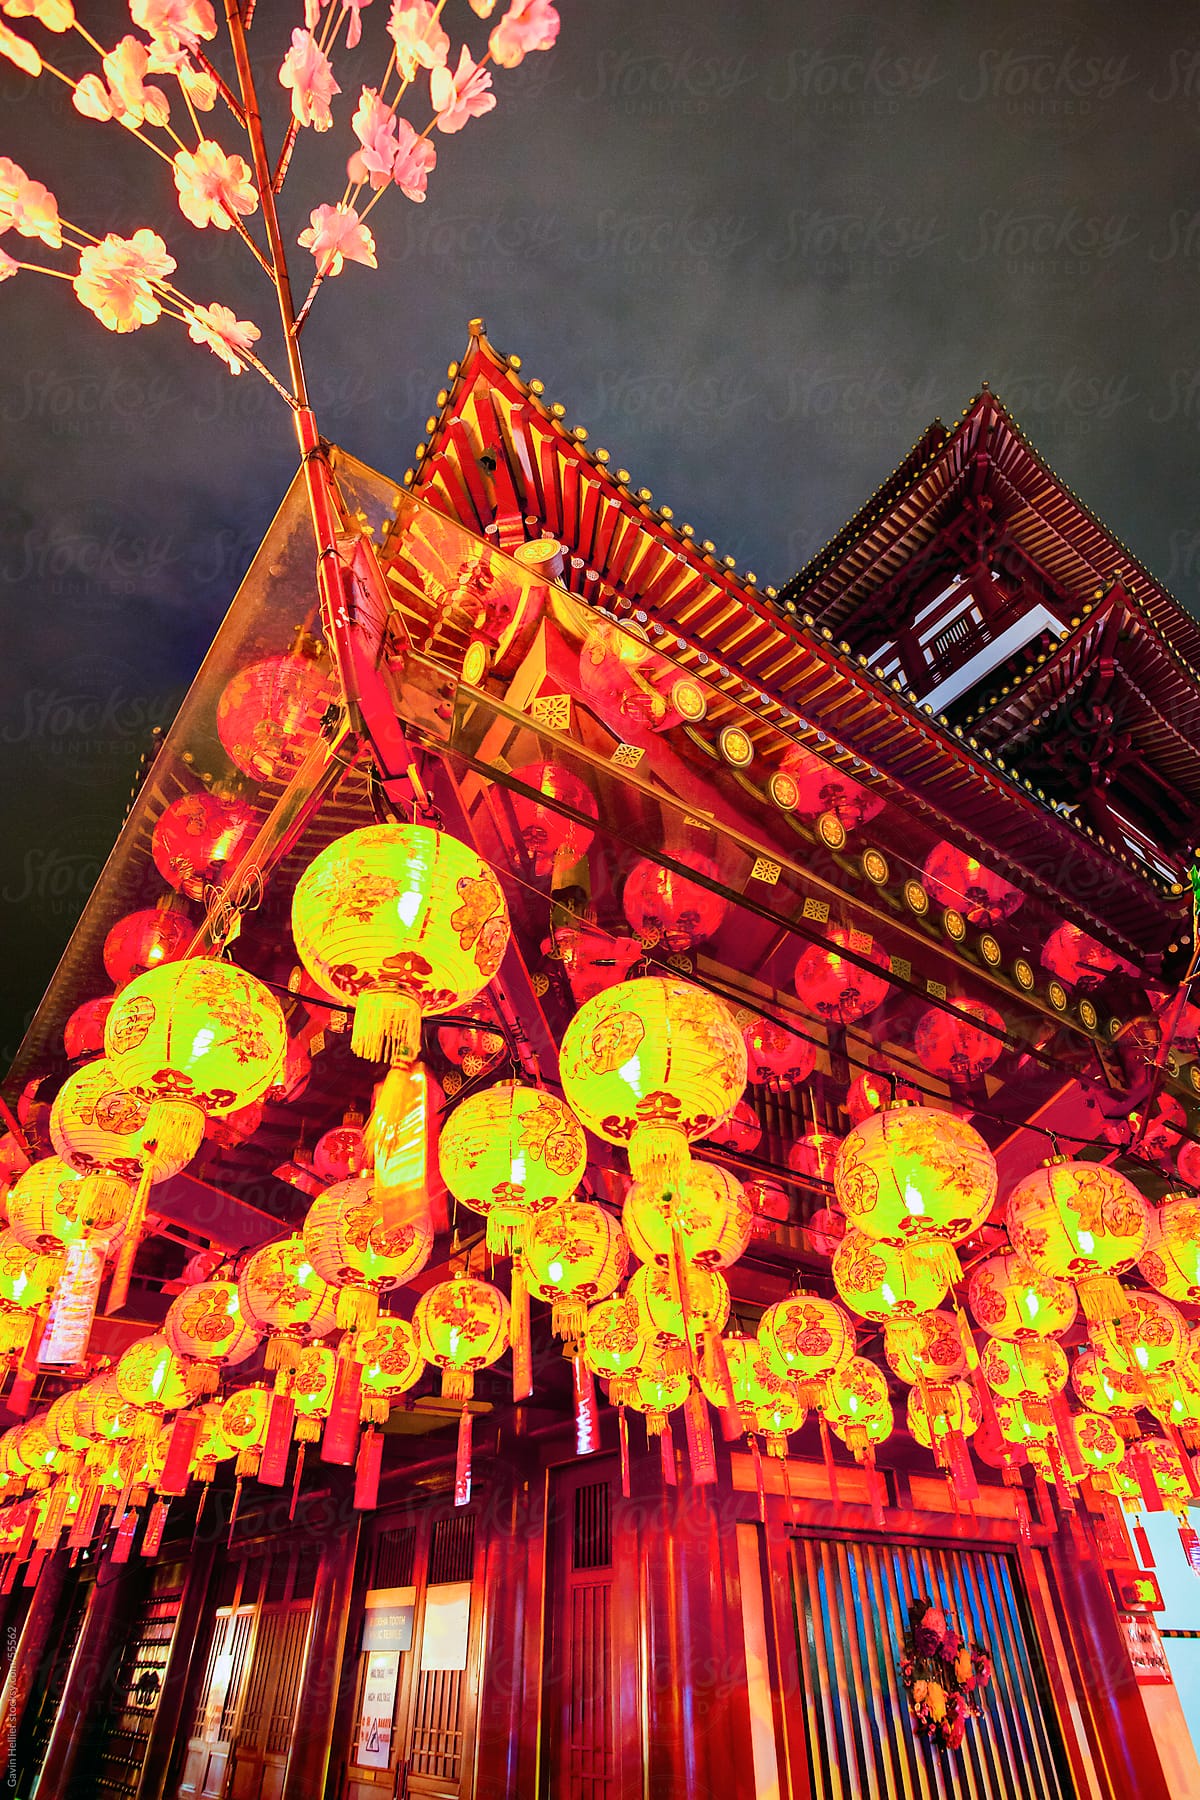 Lanterns hanging outside the New Buddha Tooth Relic Temple on South Bridge road in Singapore